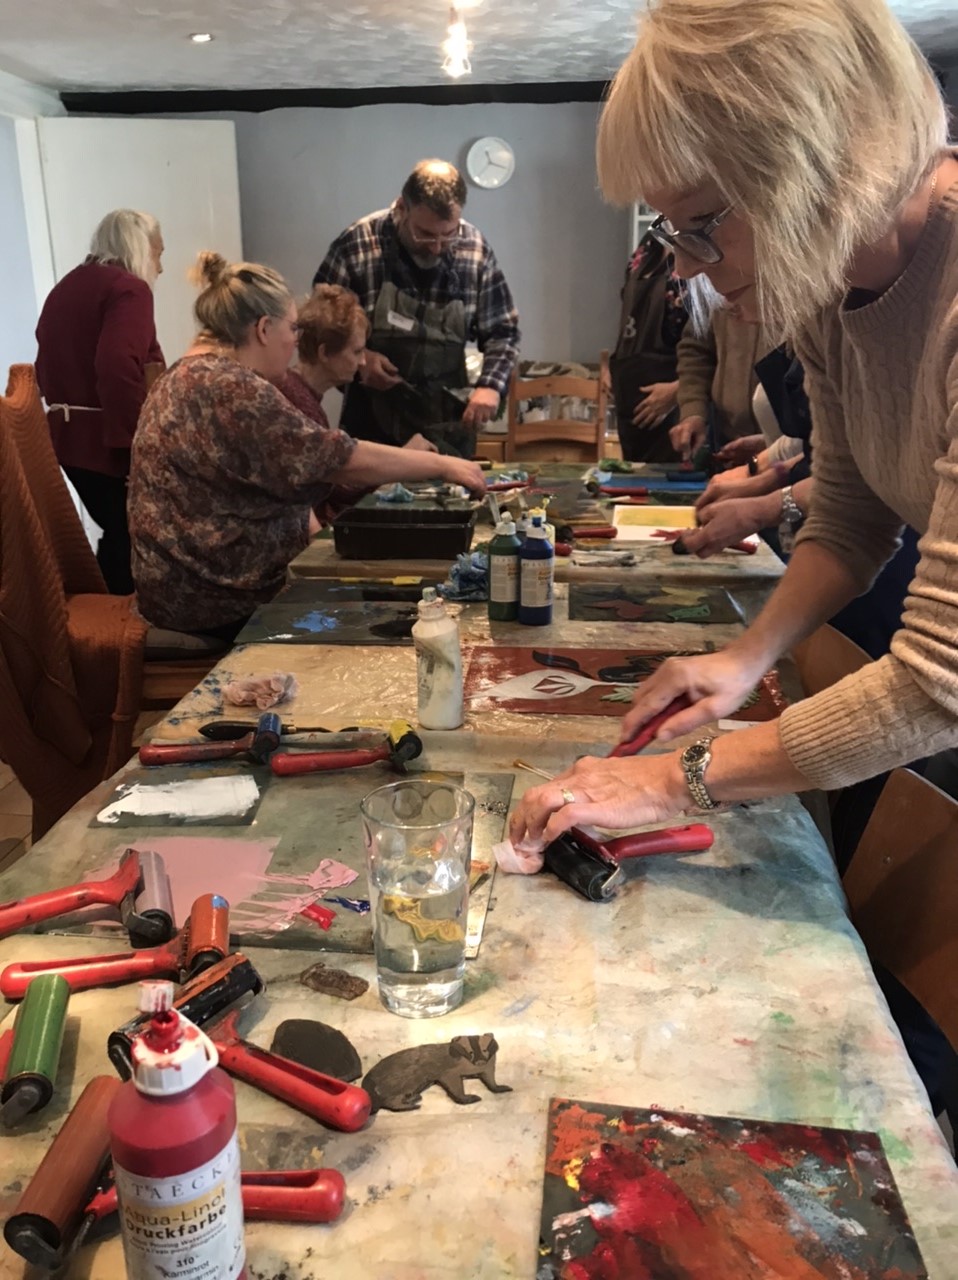 A photo from one of the taster workshops. For this workshop, the group were trying screenprinting. The group are sitting and standing around a large long table, with rollers, paint and printing stamps scattered on the table.